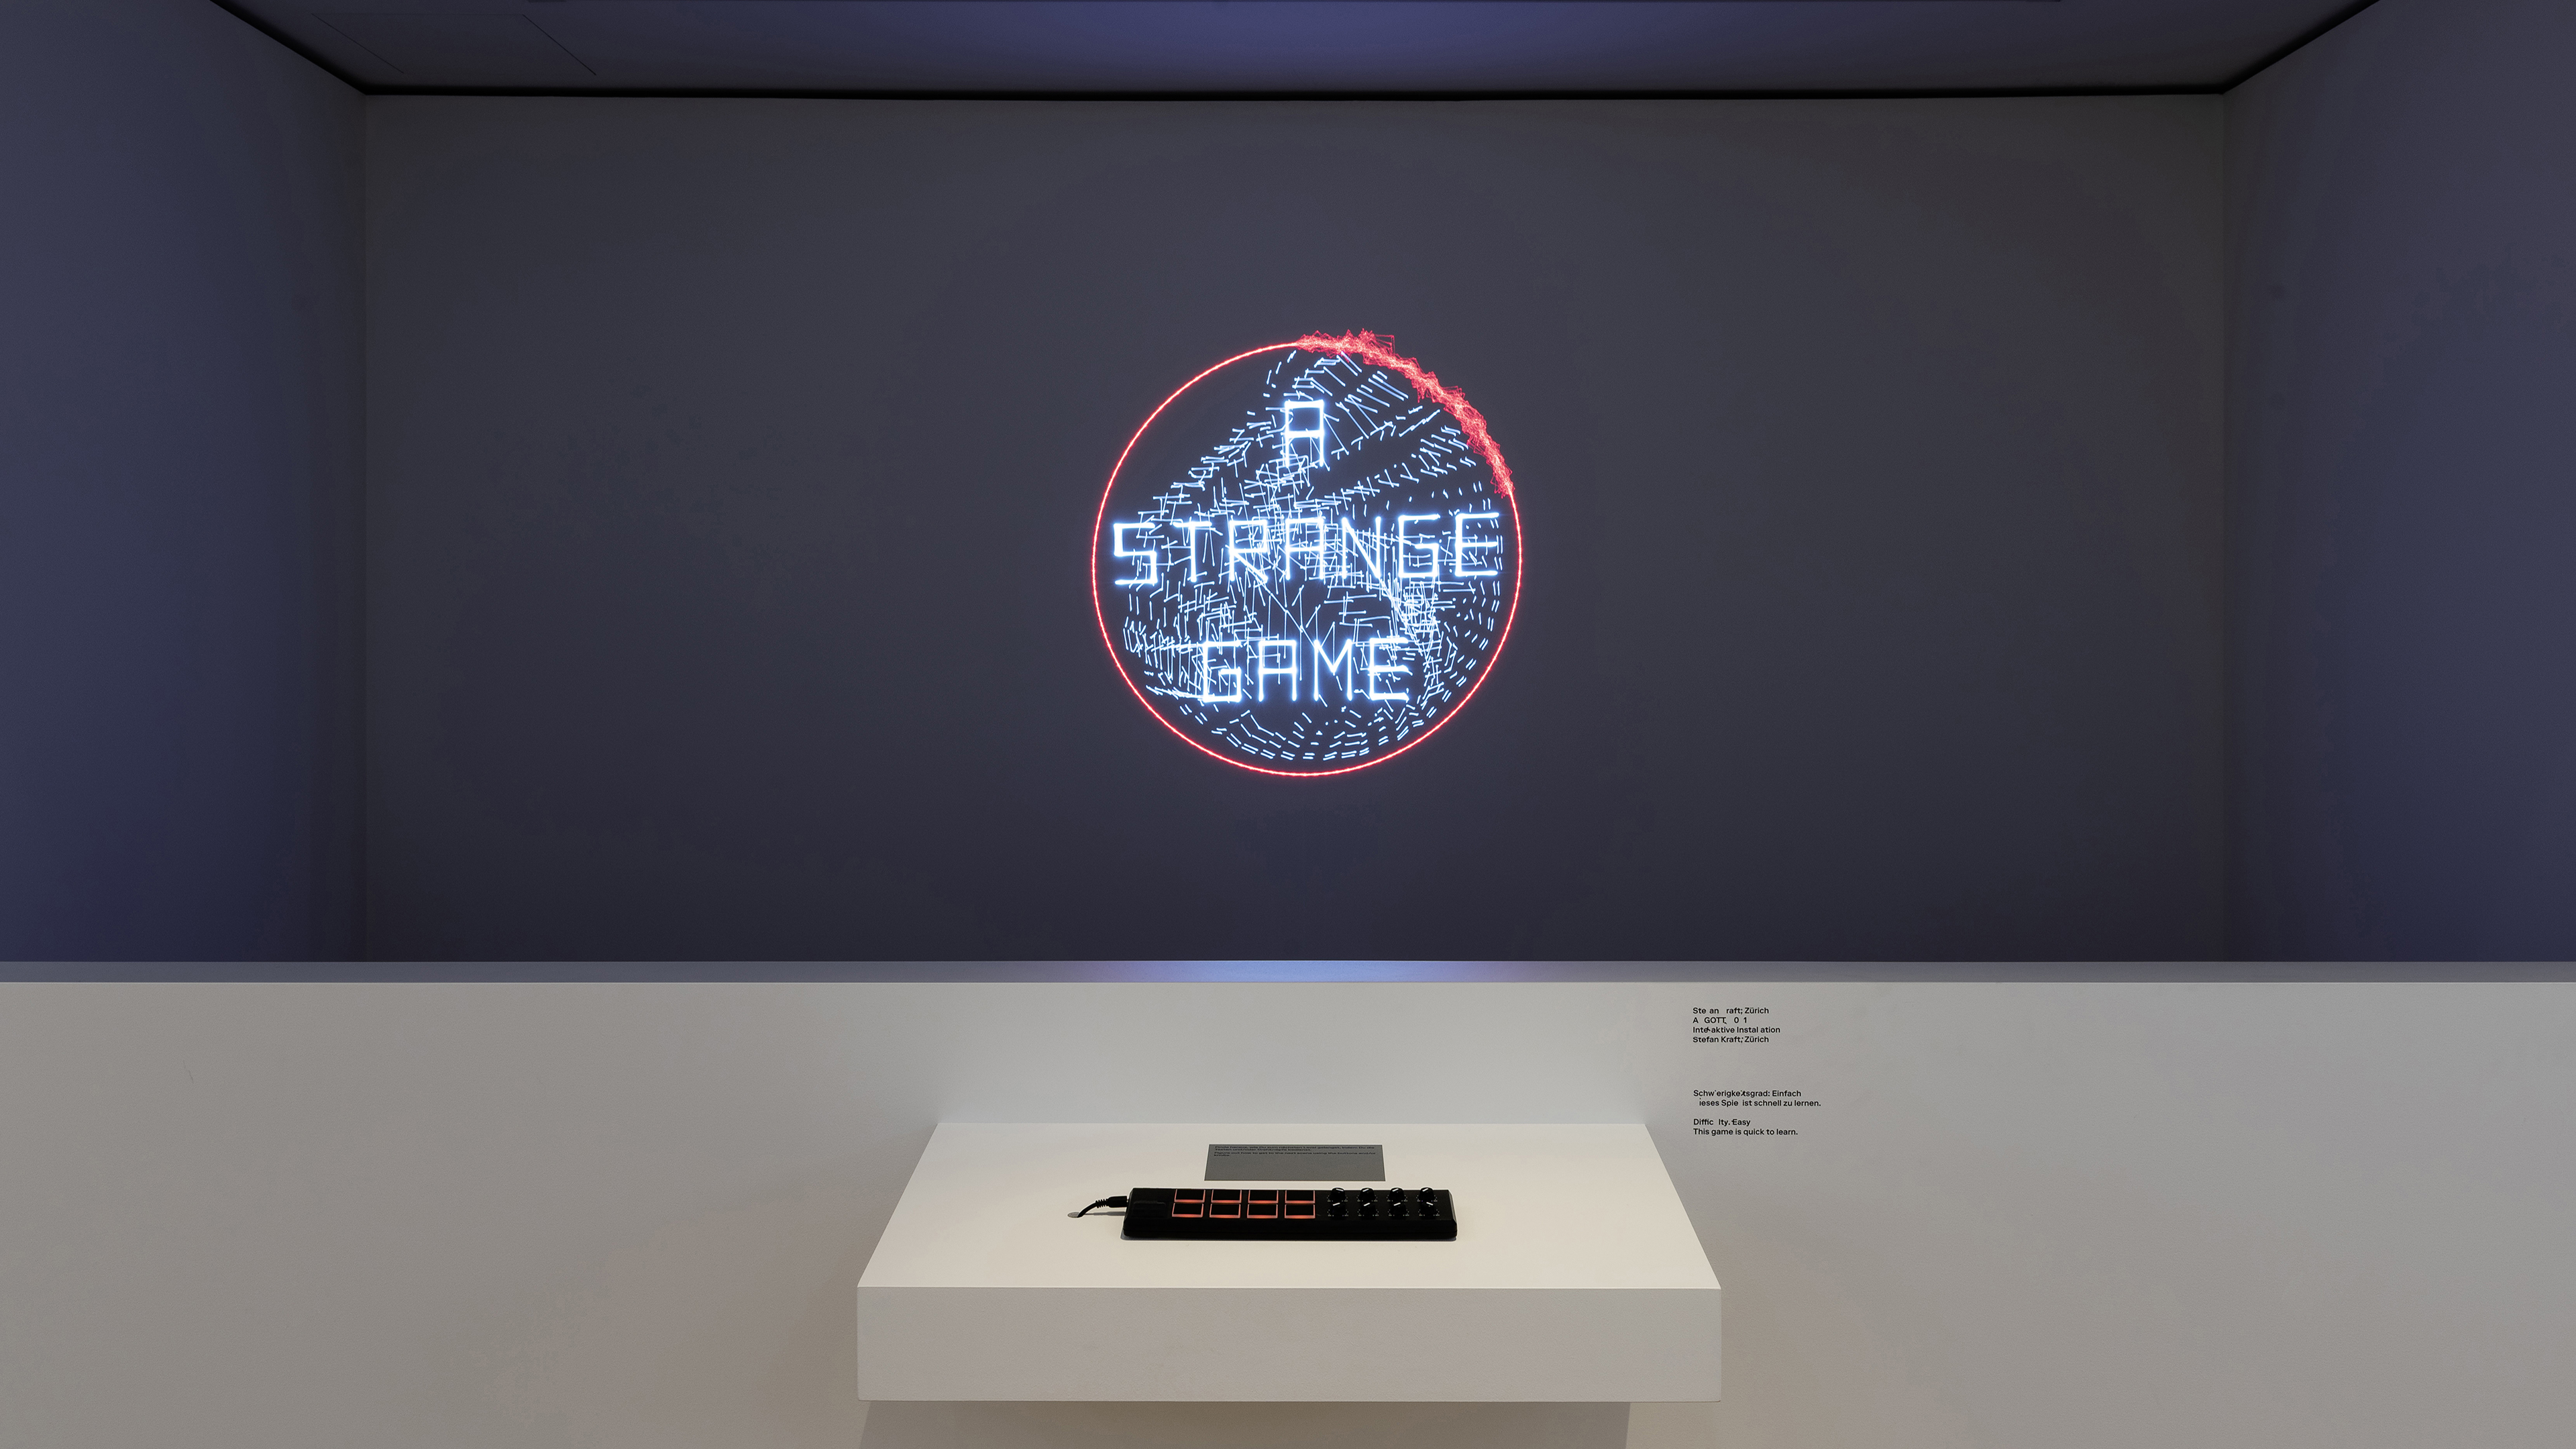 A laser image in an alcove. A red circle, inside the text 'A STRANGE GAME'